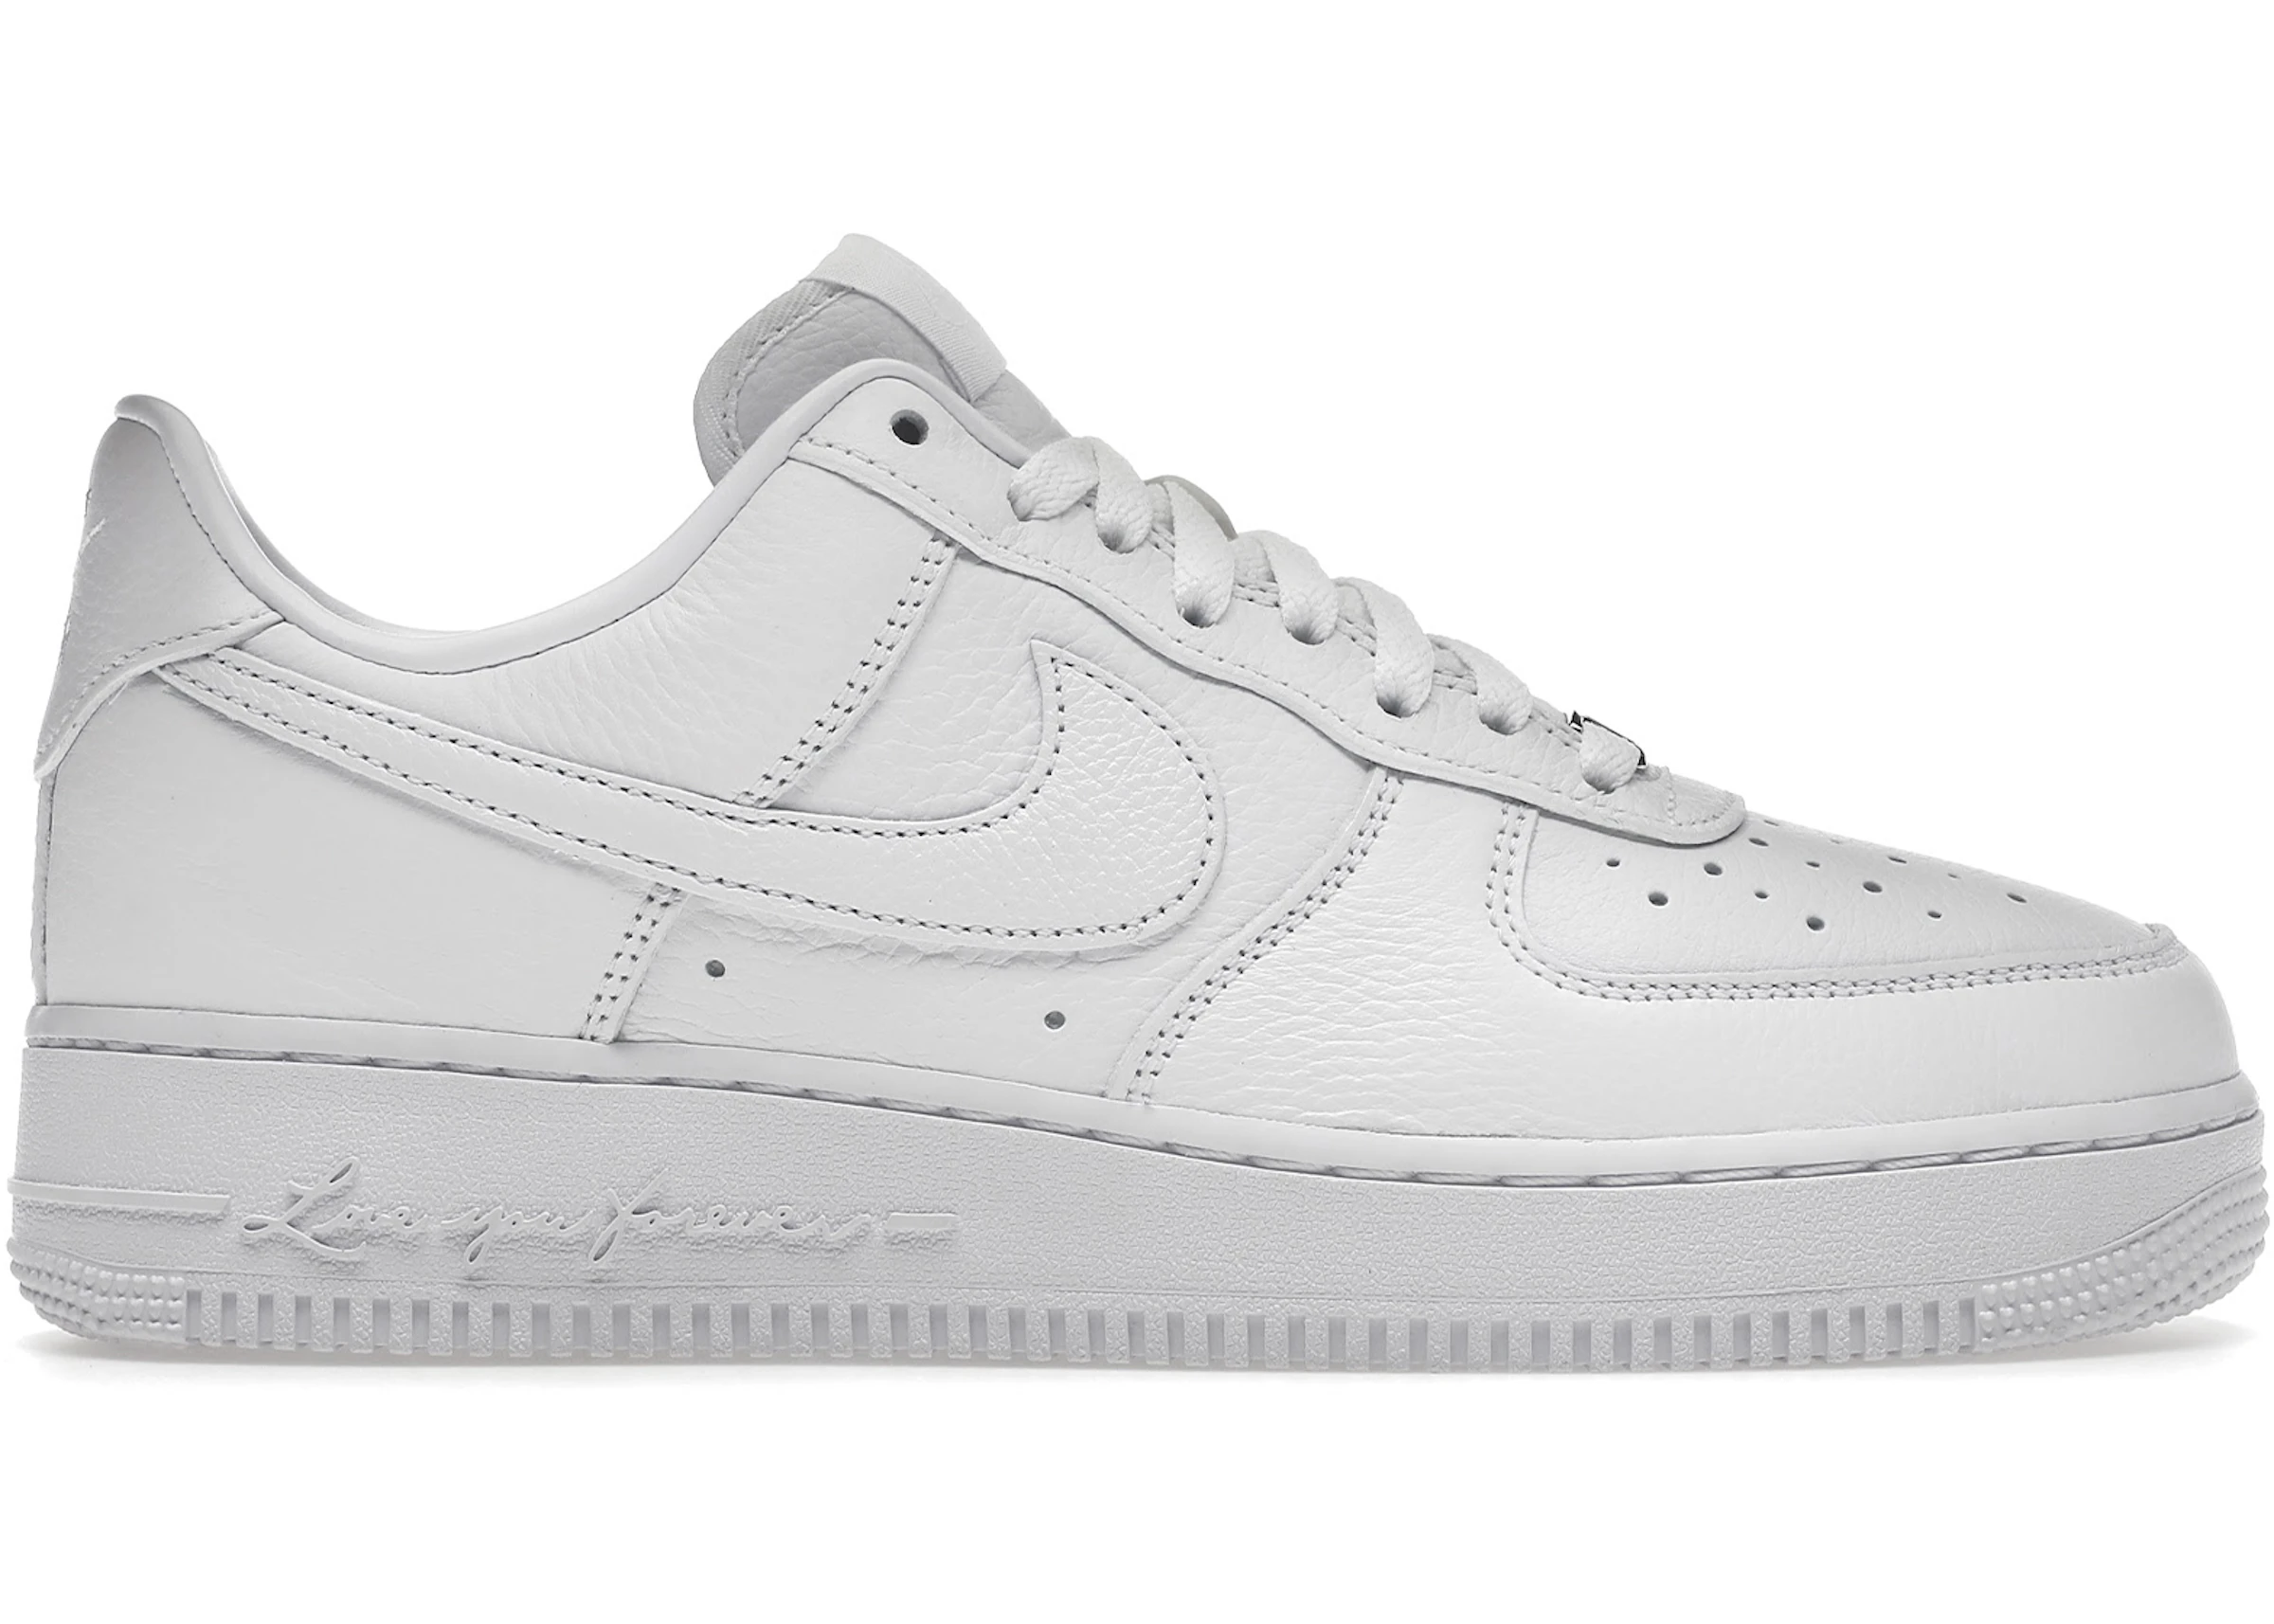 side Pets creative Nike Air Force 1 Low Drake NOCTA Certified Lover Boy - CZ8065-100 - US